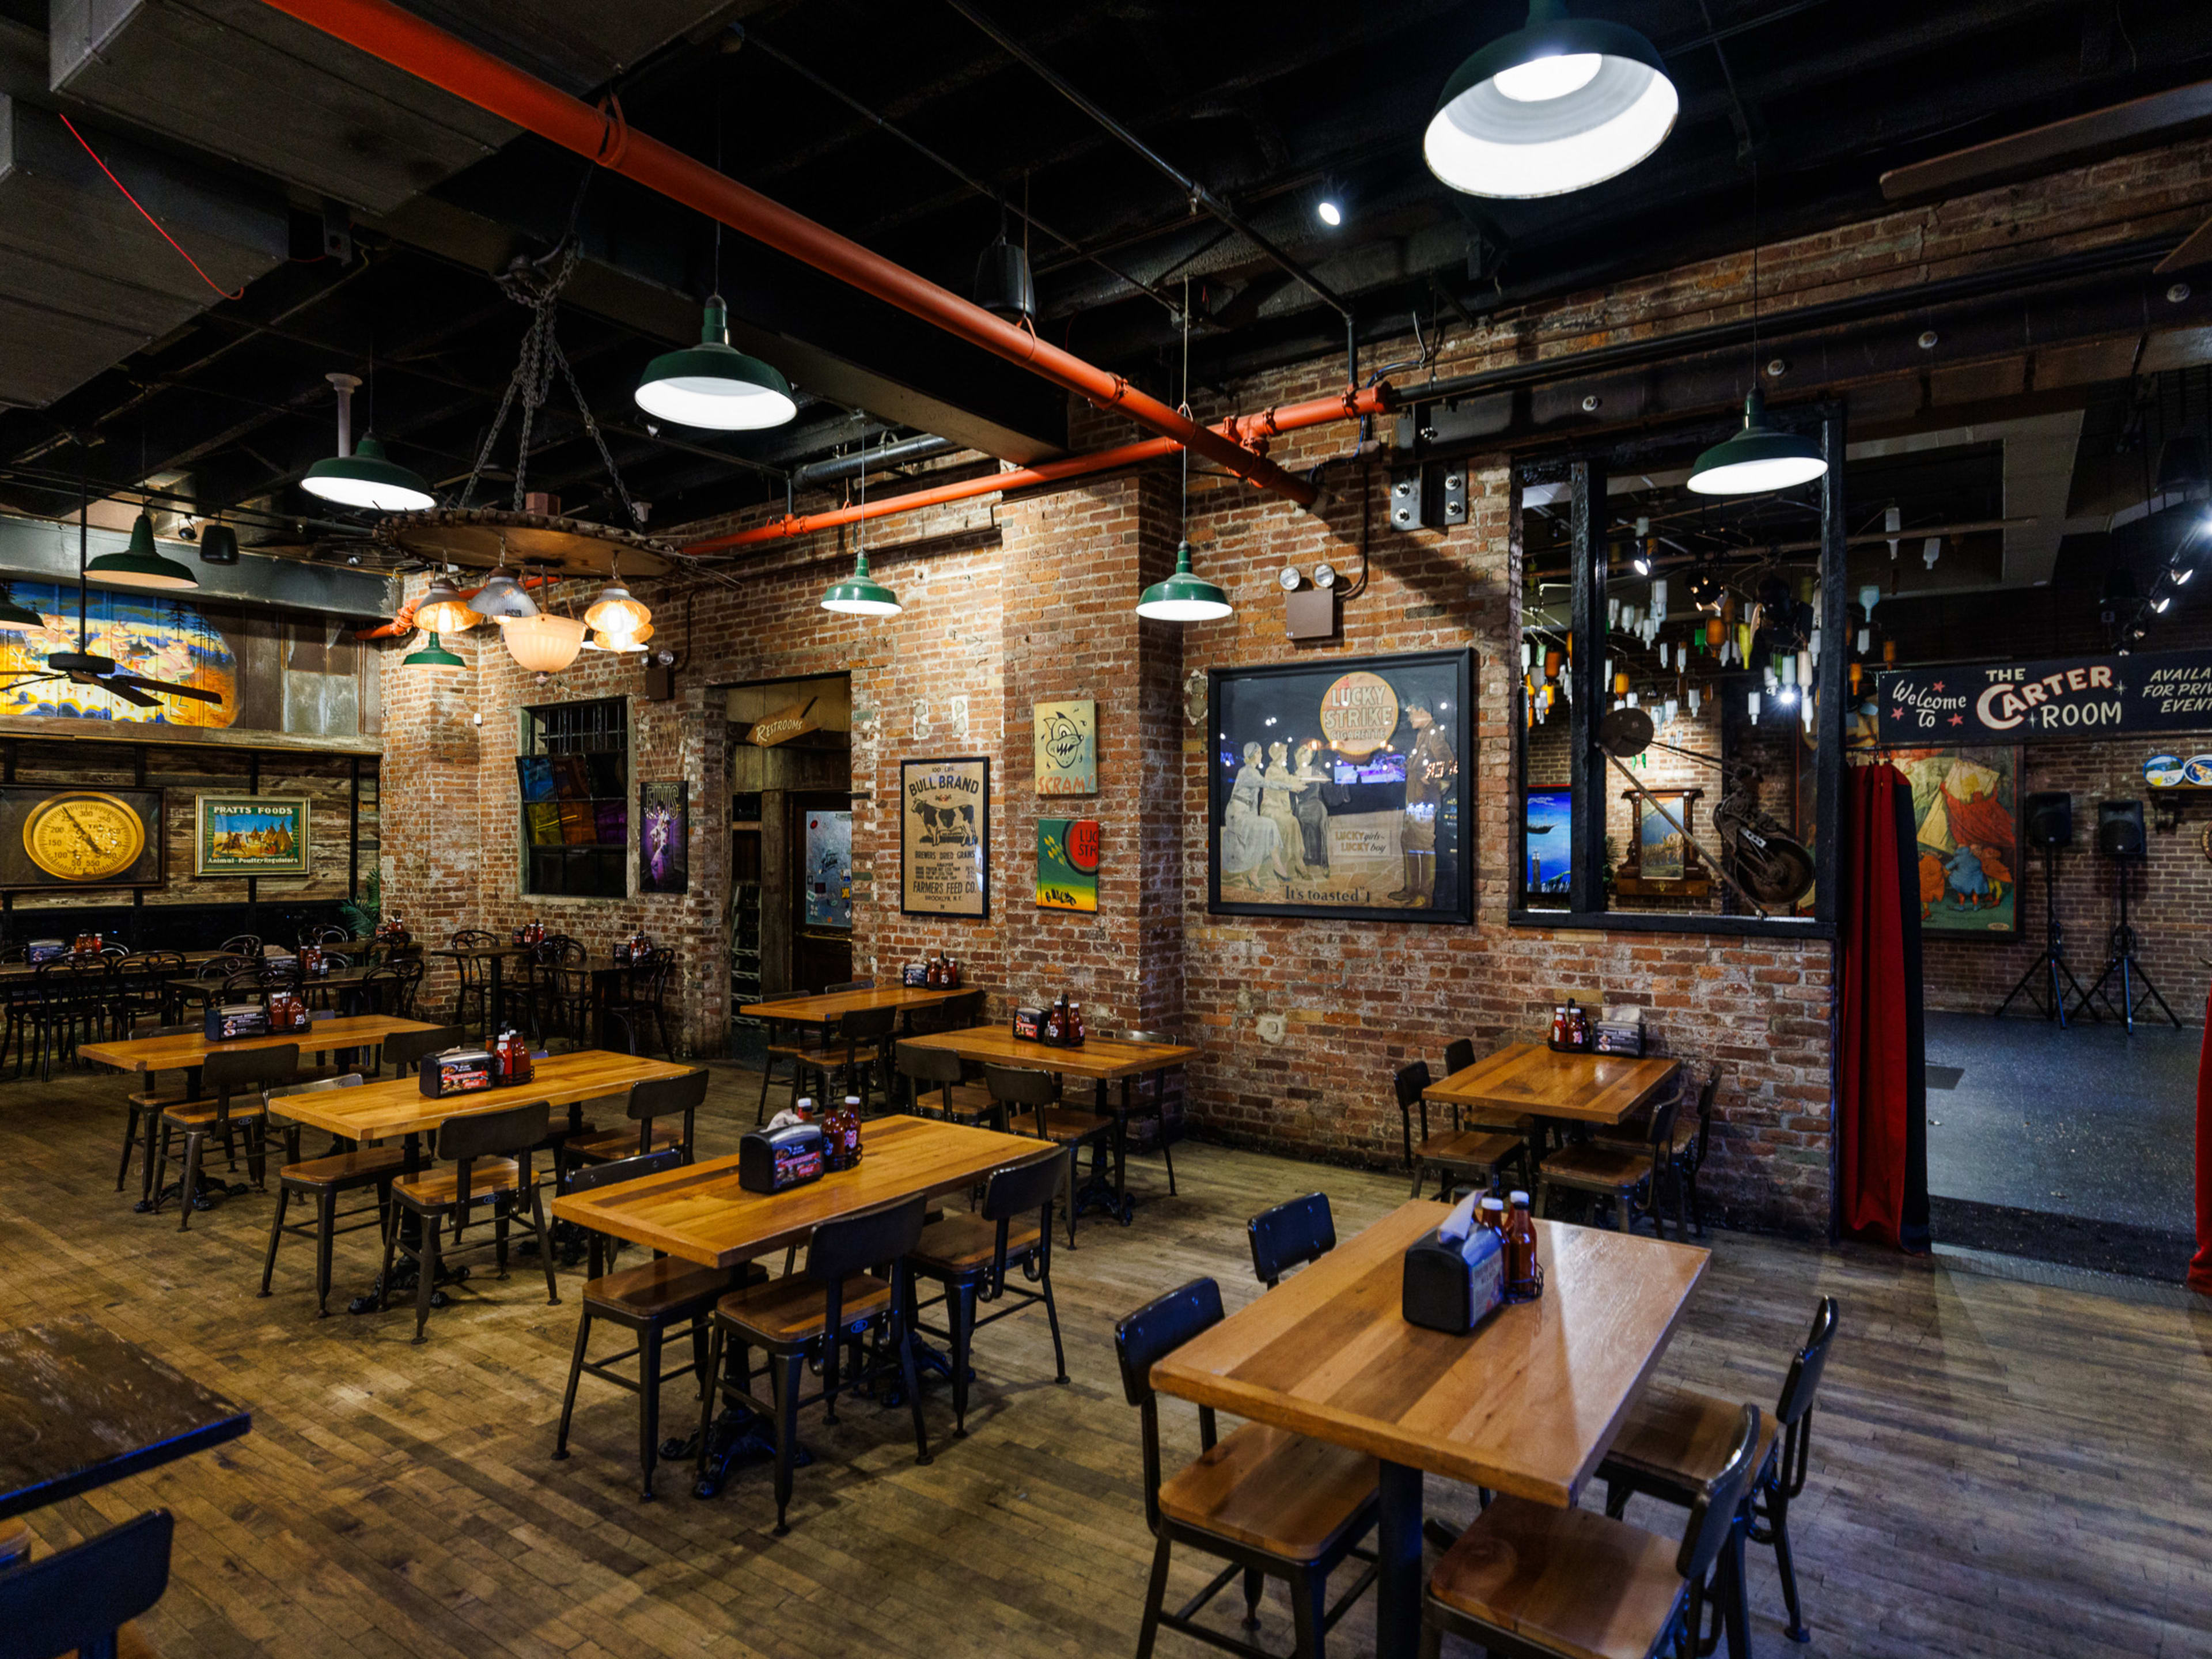 Dinosaur Bar-B-Que interiors with brick walls, framed art on the walls, and multiple square wooden tables